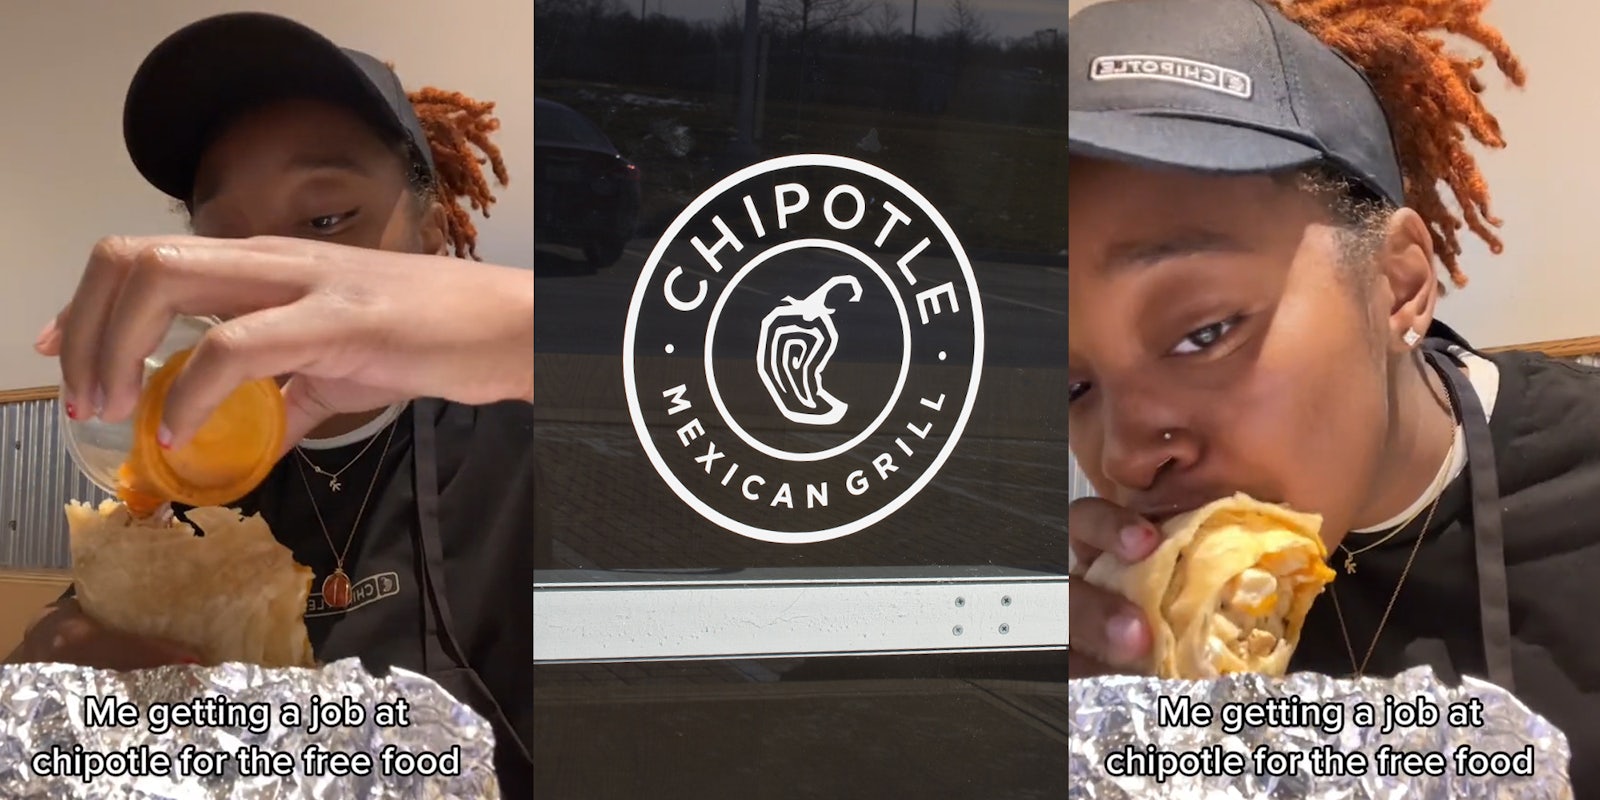 Chipotle worker pouring vinaigrette on Chipotle food with caption 'Me getting a job at chipotle for the free food' (l) Chipotle sign on glass door (c) Chipotle worker eating with caption 'Me getting a job at chipotle for the free food' (r)